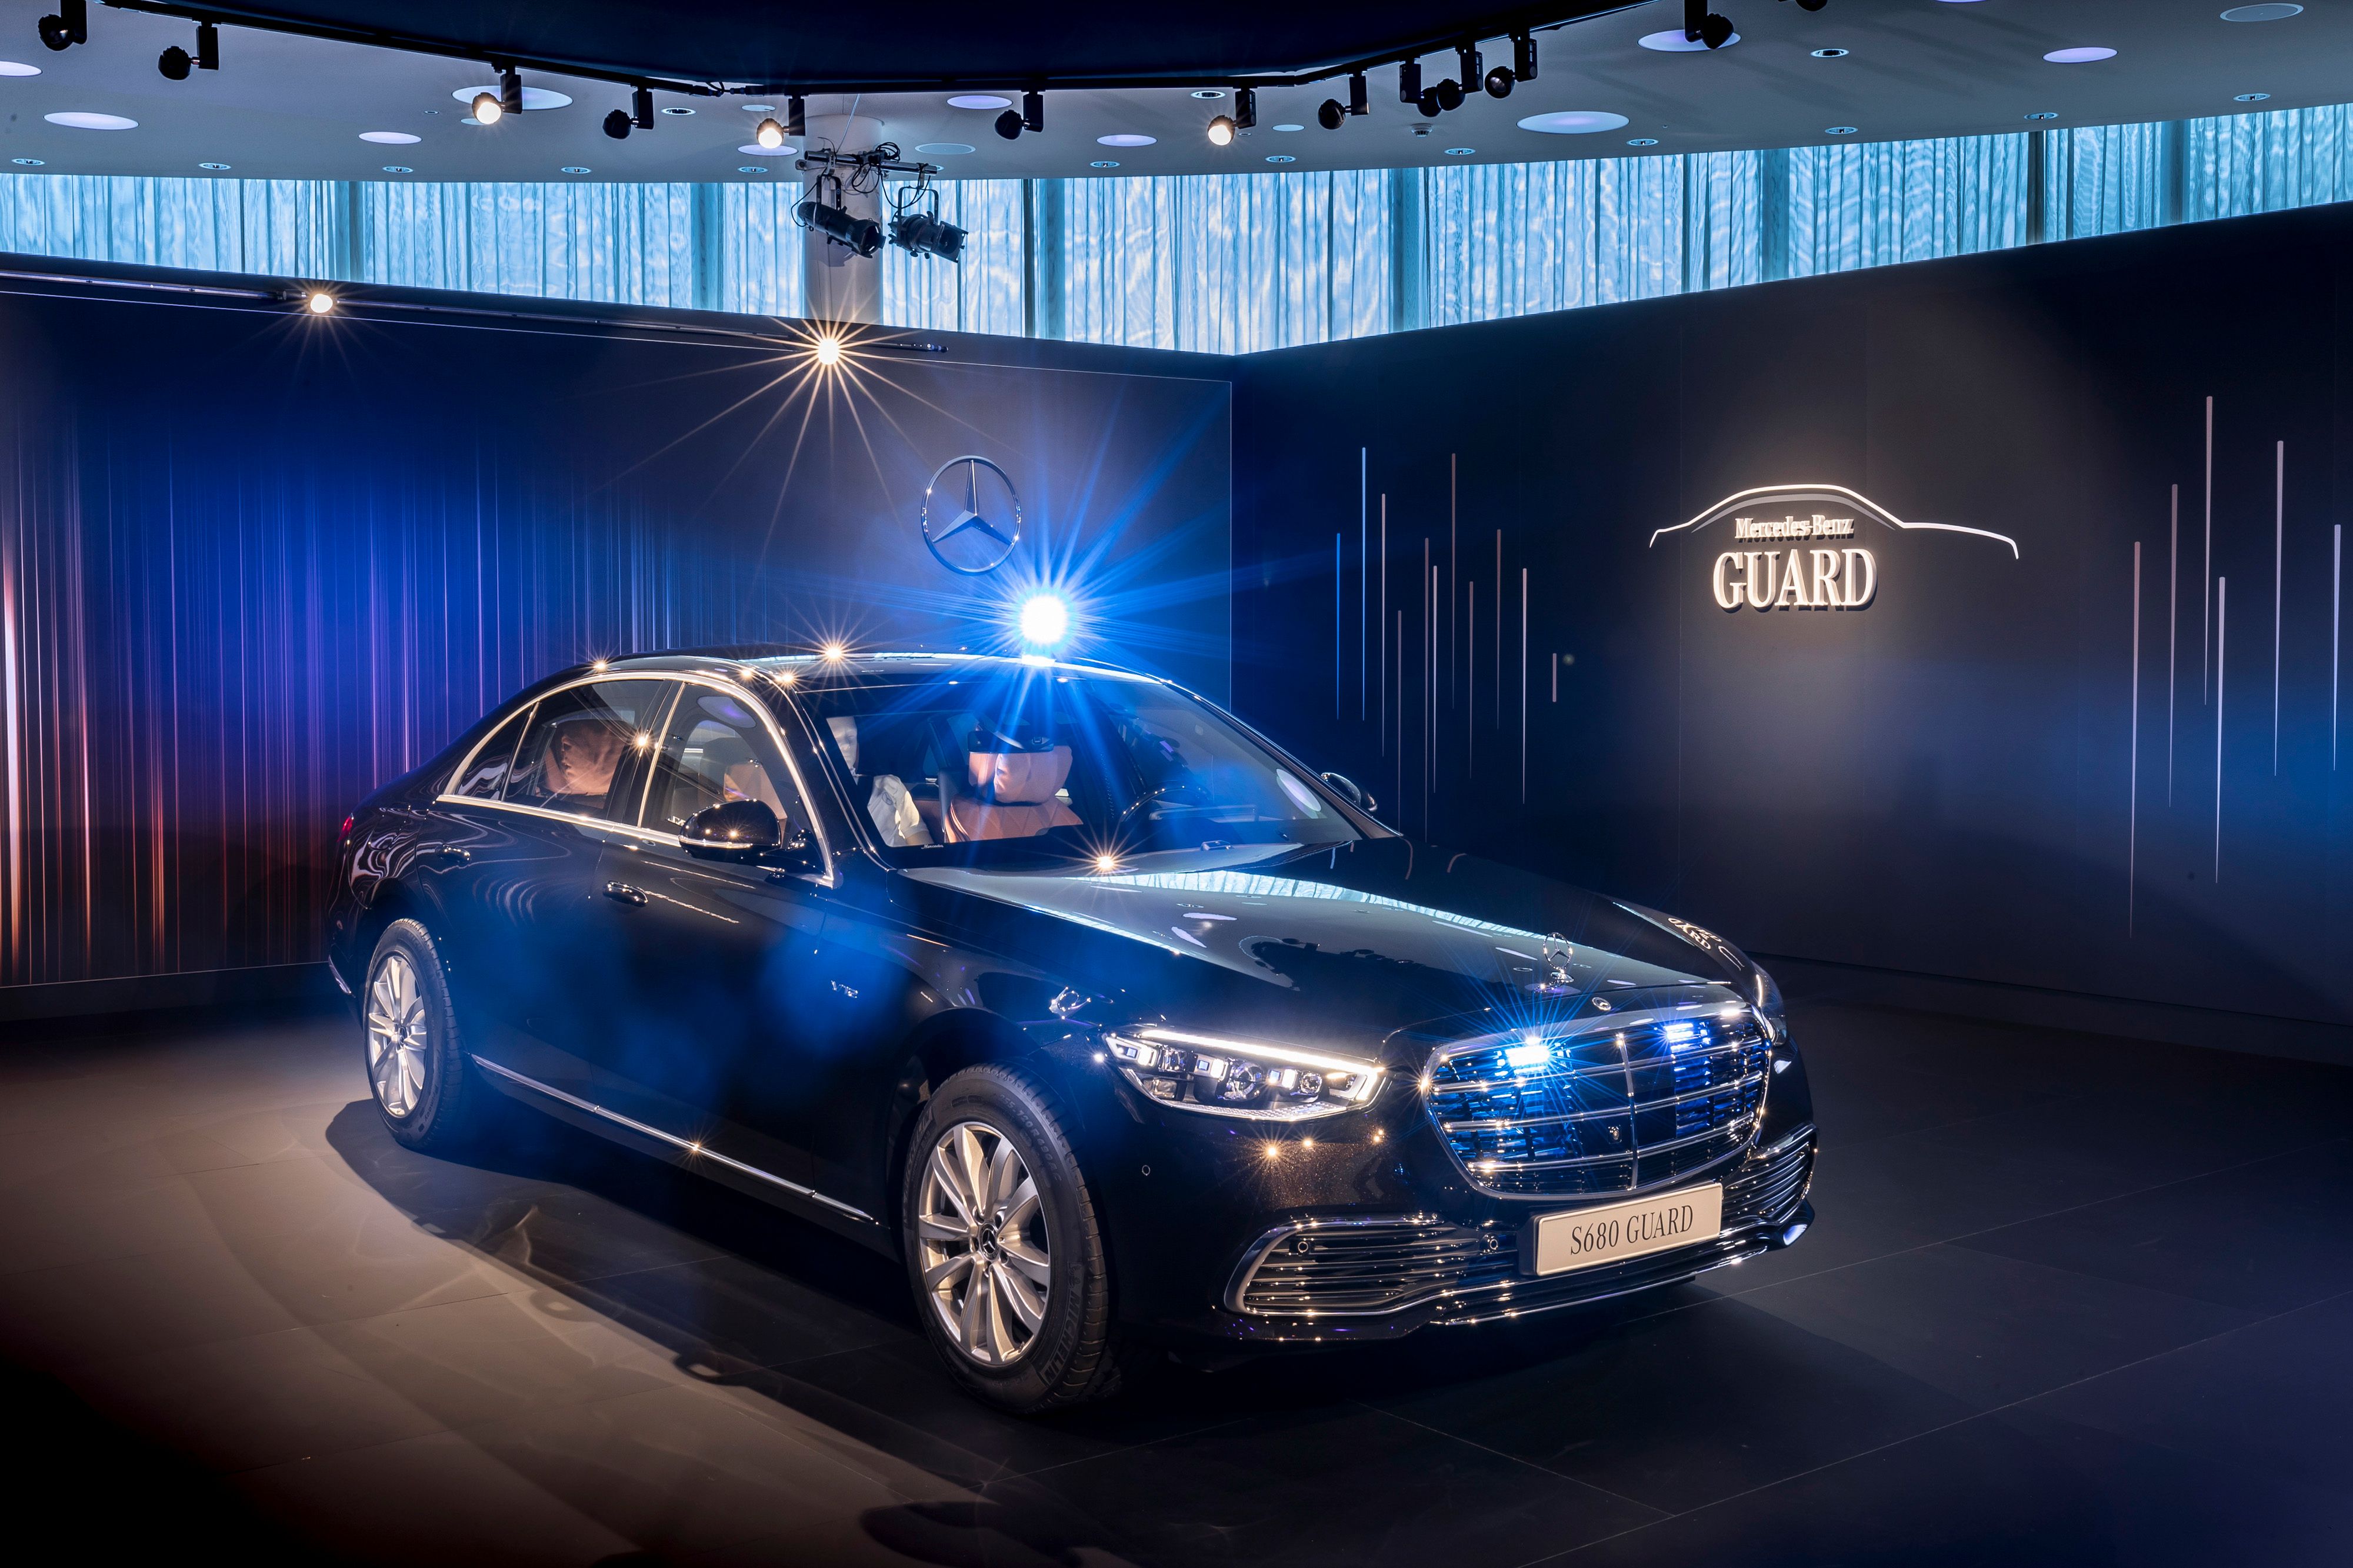 2021 Mercedes-Benz S 680 Guard 4MATIC – An Armored Car That Can Withstand Even Kalashnikov and Dragunov Sniper Rifle Shots!